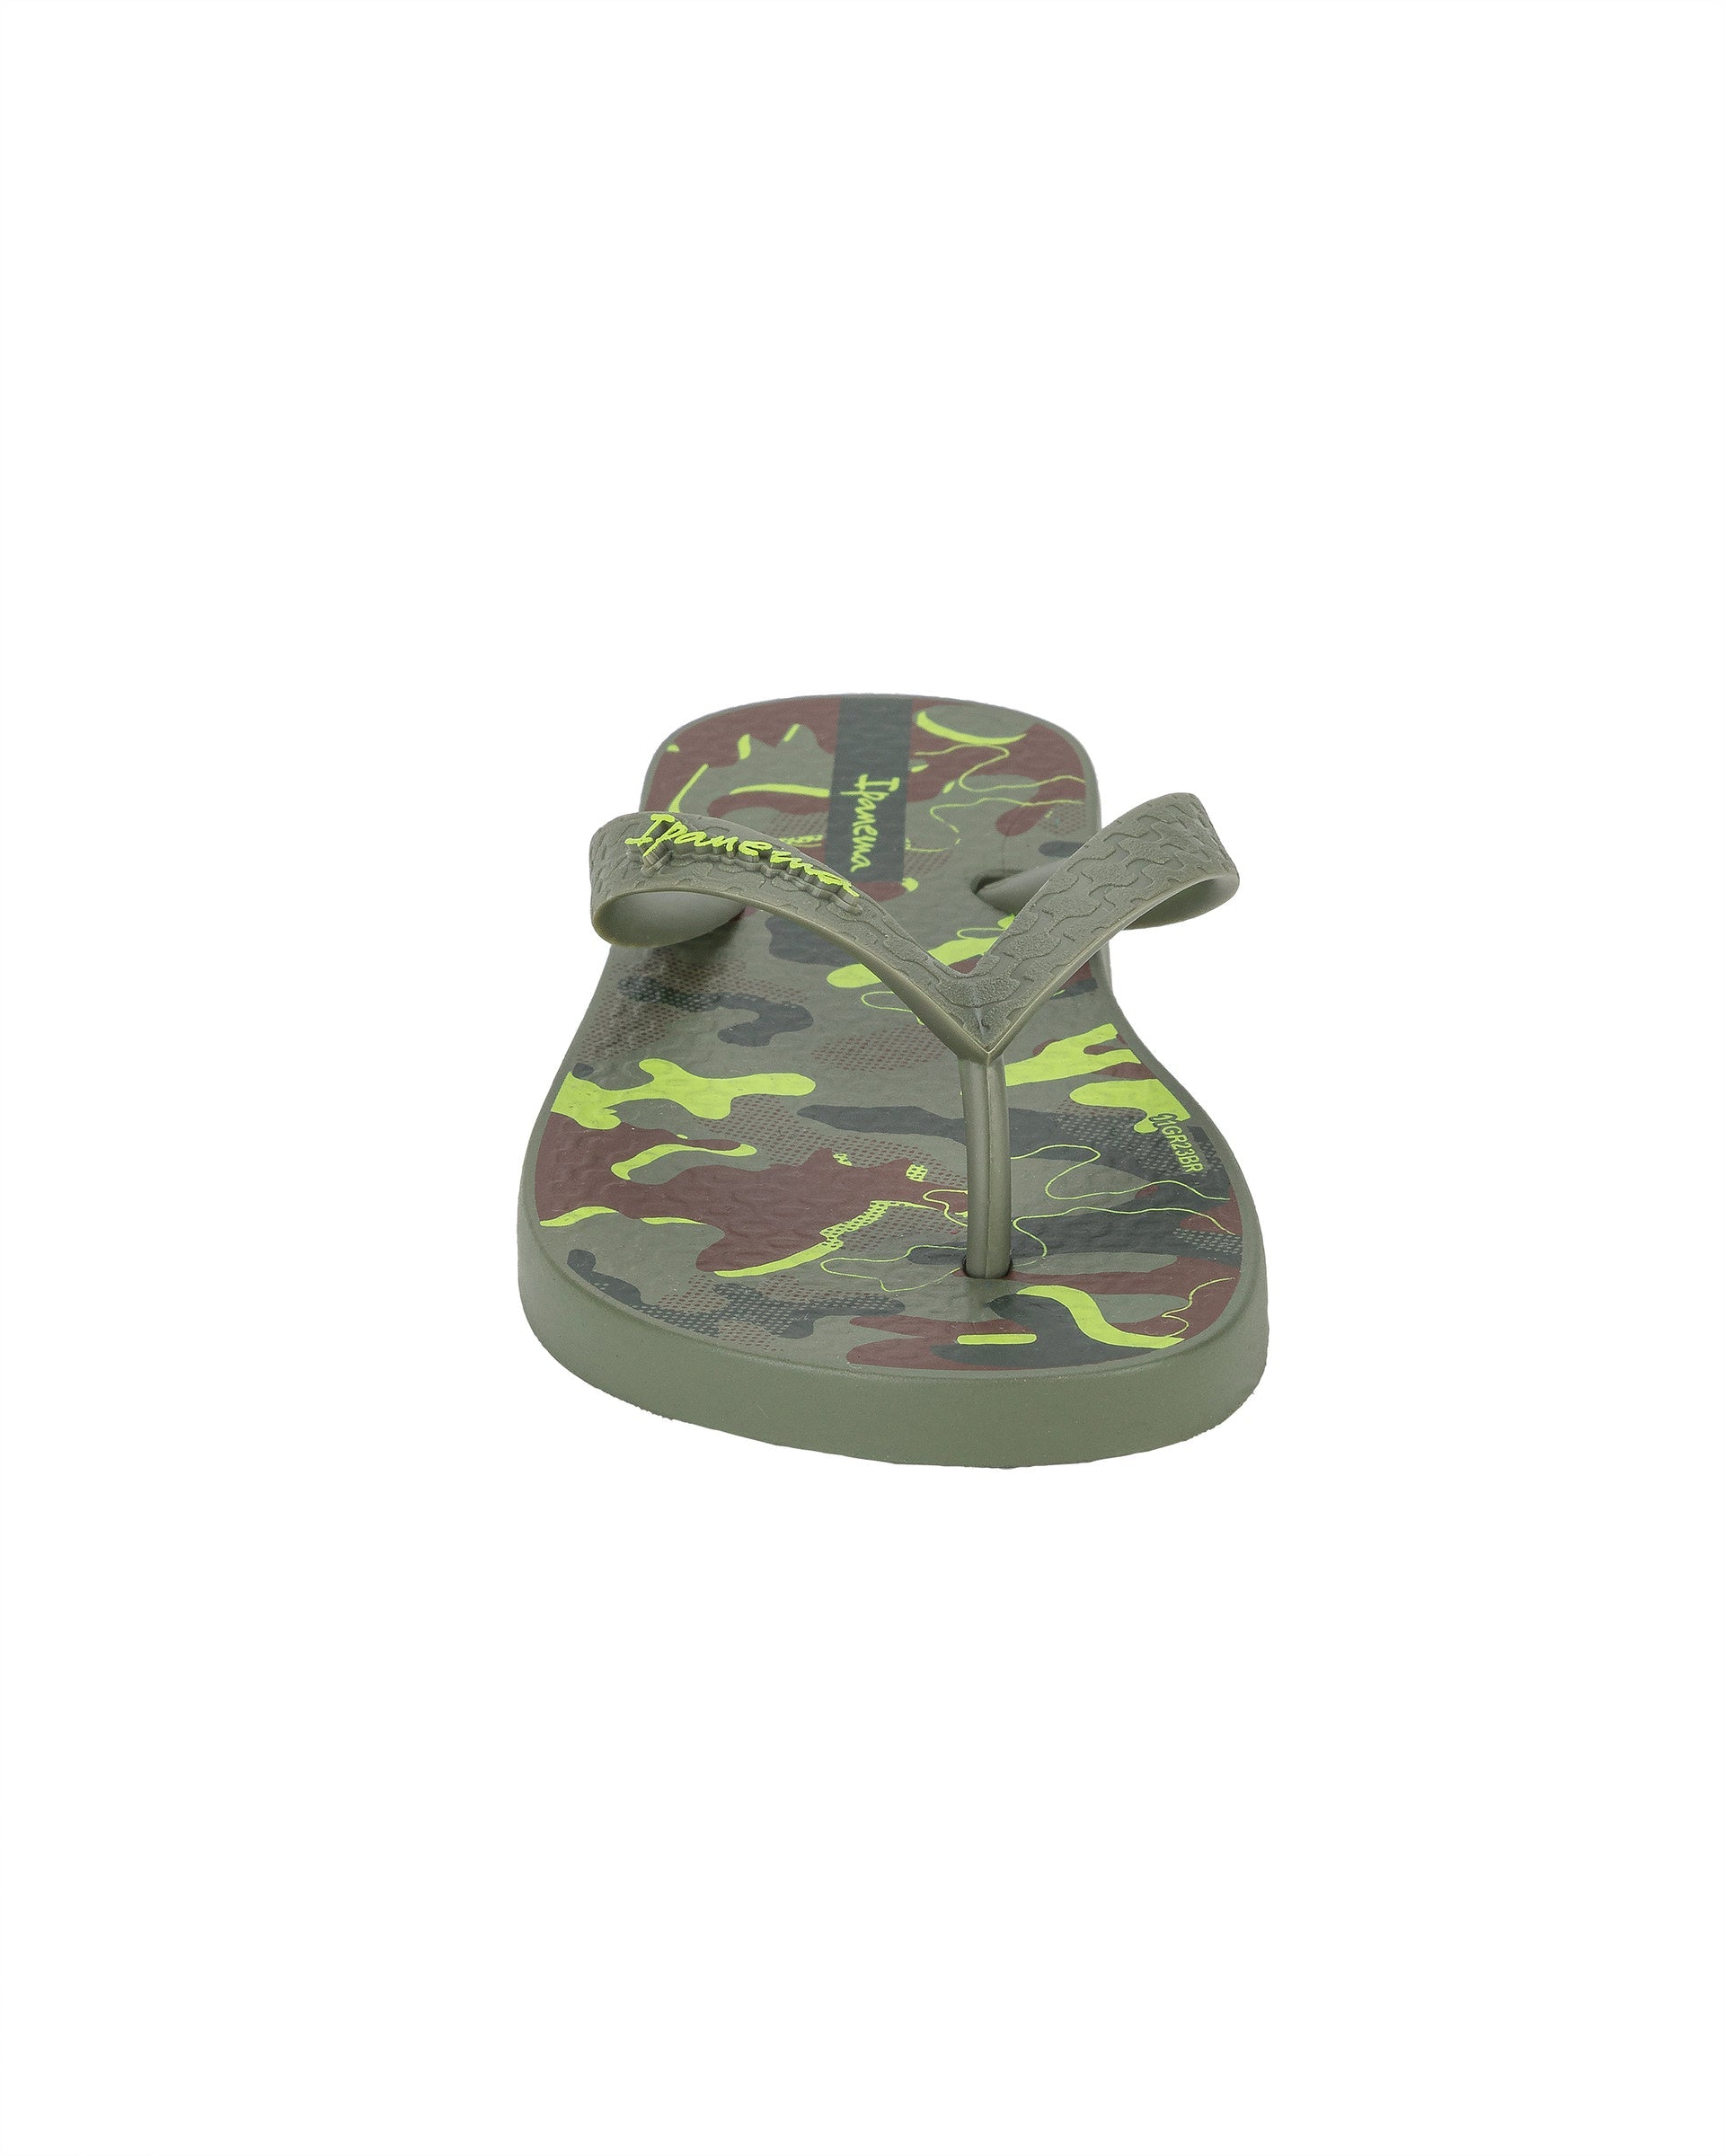 Front view of a green Ipanema Temas kids flip flop with camo print.